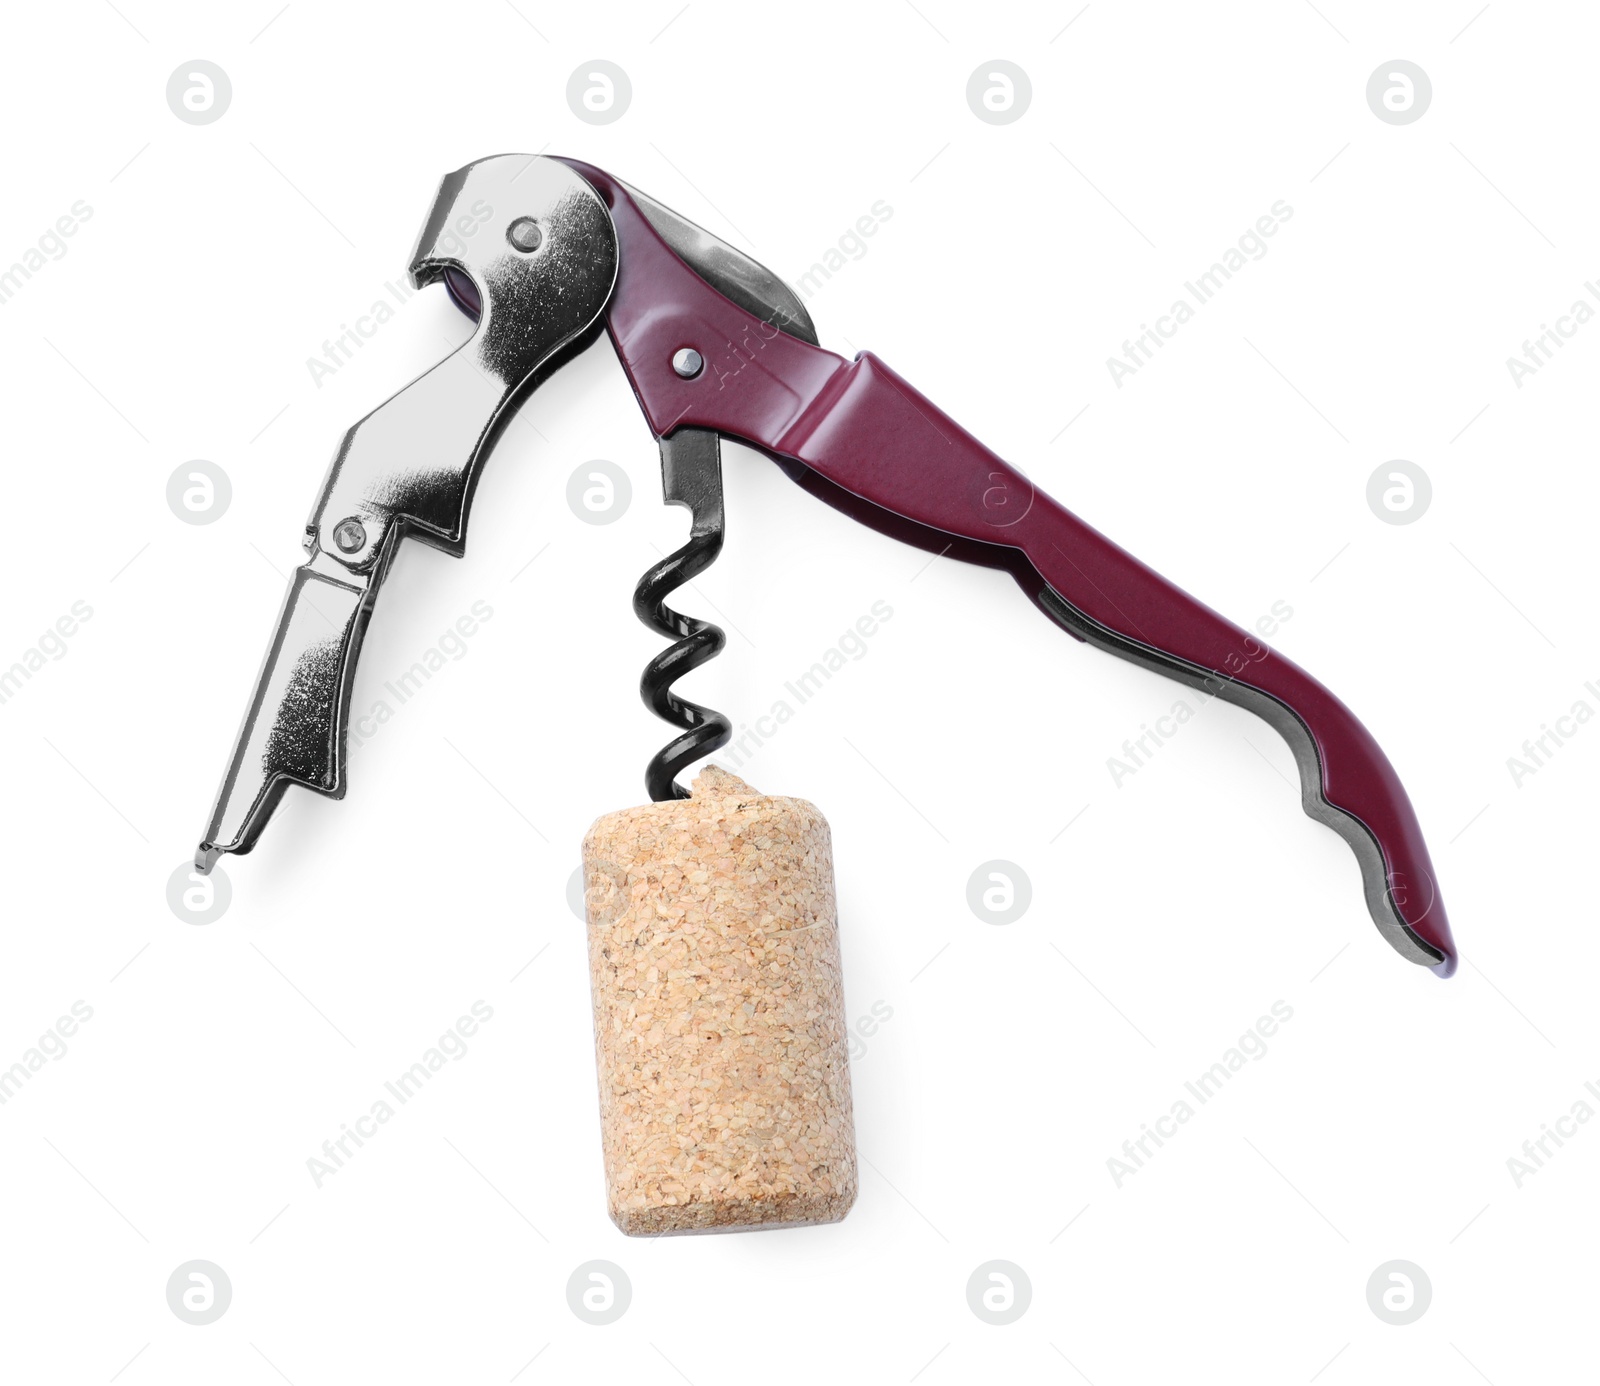 Photo of Corkscrew and wine bottle stopper isolated on white, top view